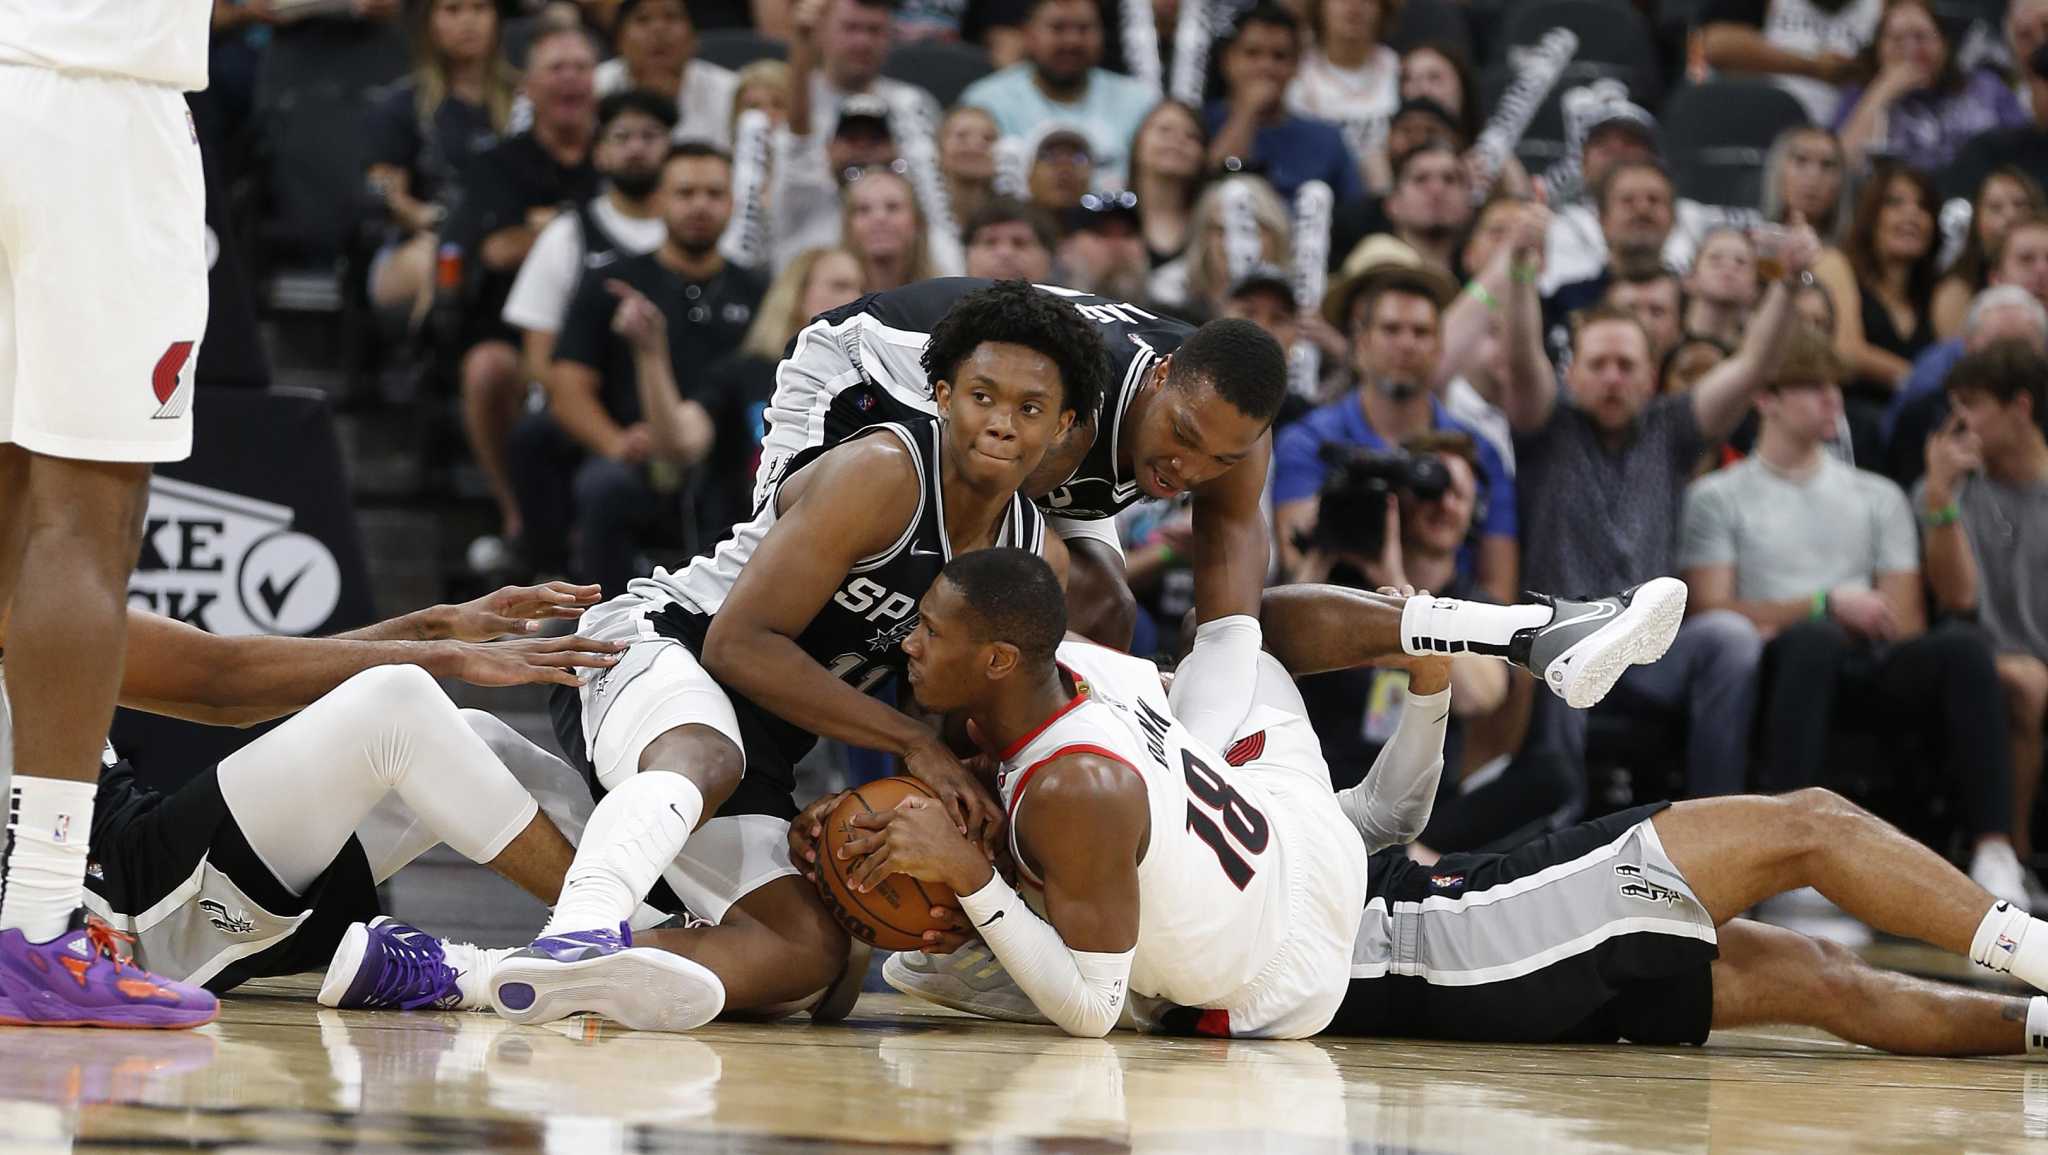 Breaking down the Spurs' roster for 2021-22